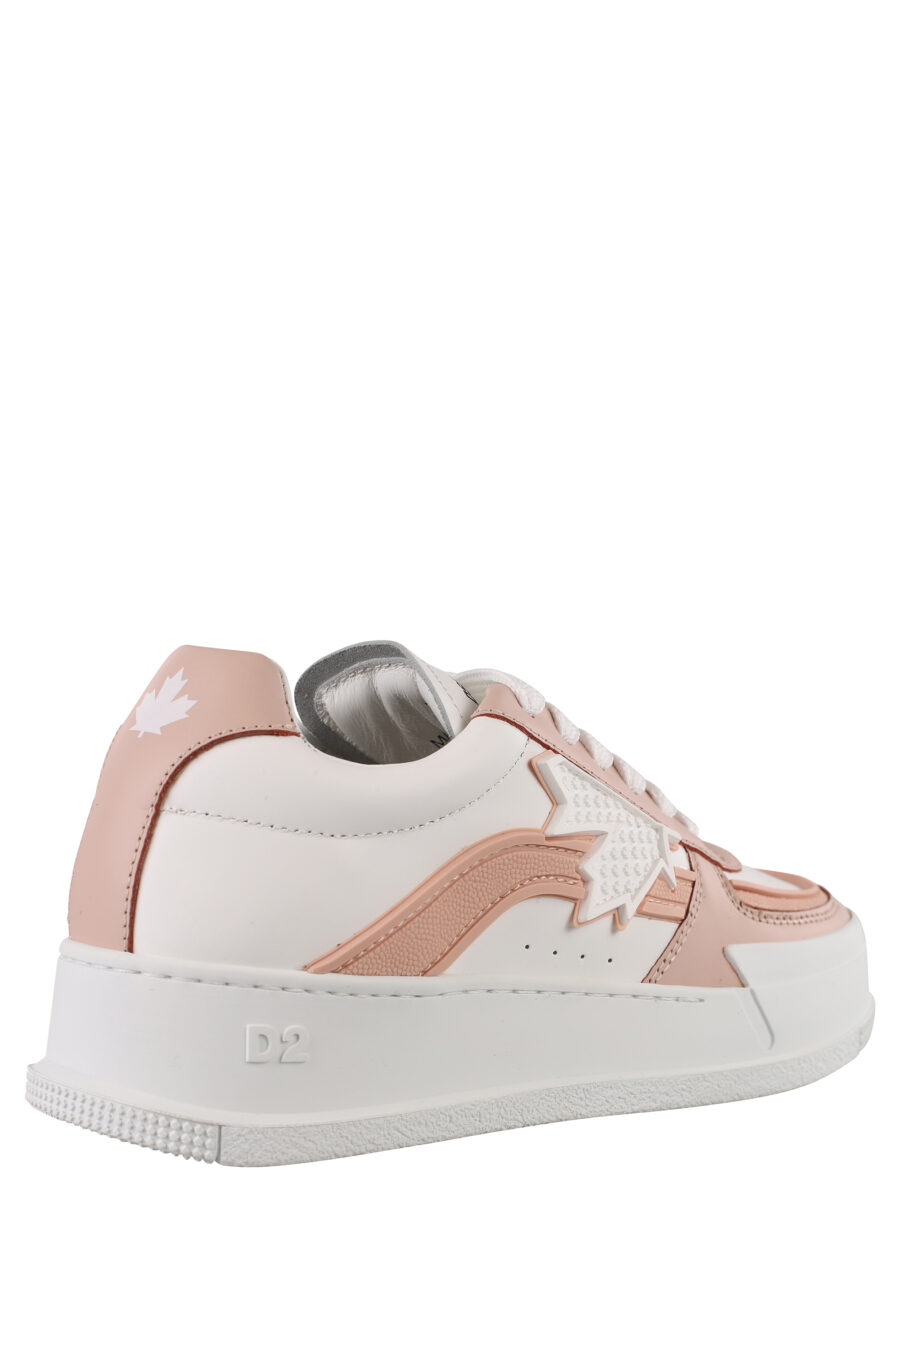 White platform trainers with pink detail - IMG 1175